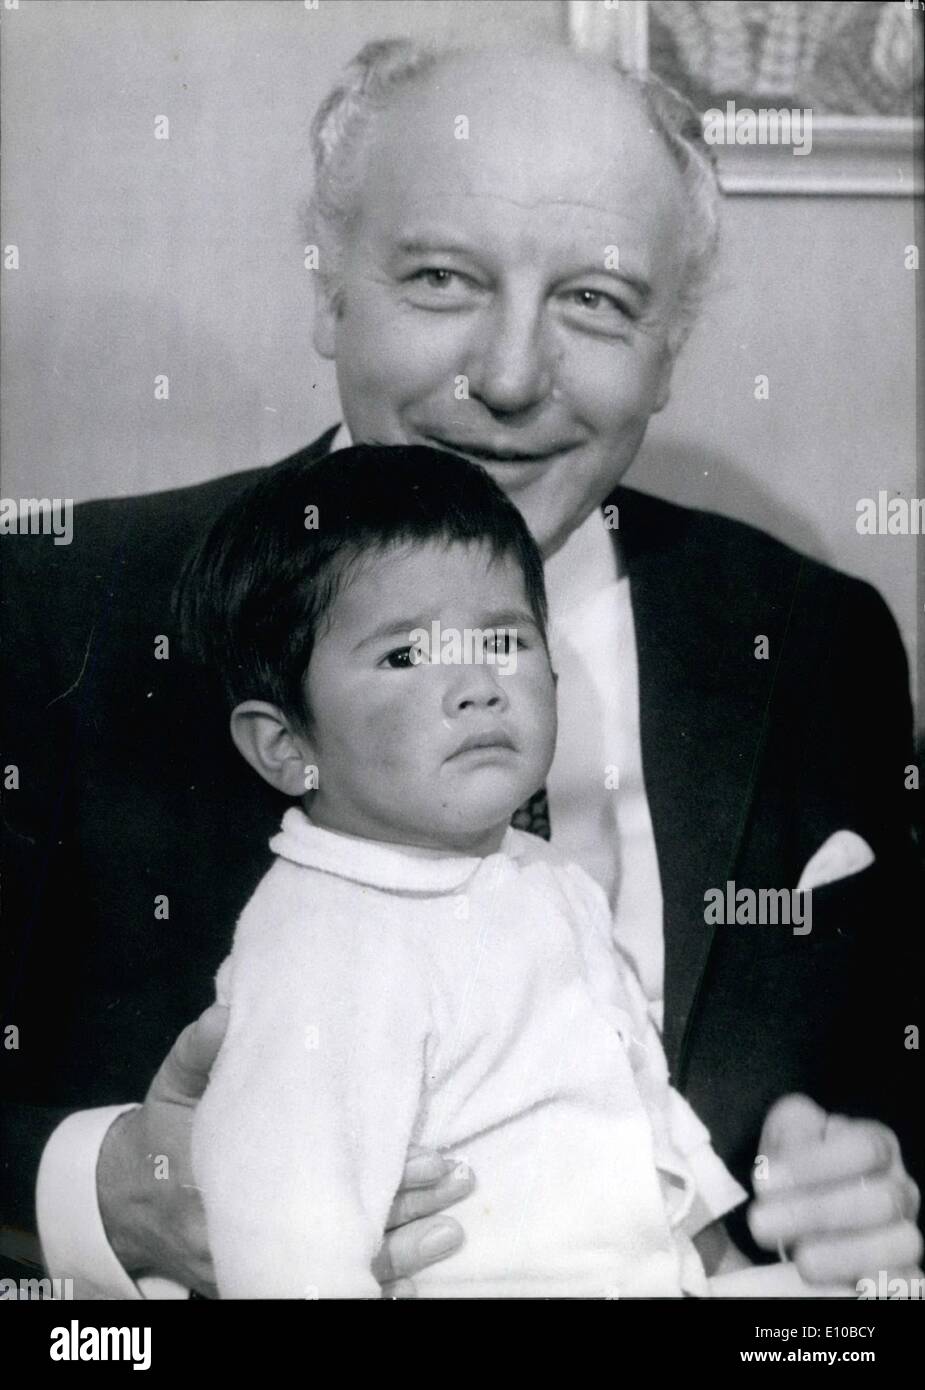 Mar. 03, 1972 - FOSTER-SON OF WALTER SCHEEL WILL BE 3 YEARS OLD ON MARCH 28TH Little Simon Martin from Bolivia is well looked after in the house of the Federal Foreign Minister Walter Scheel (photo). For the first time he ie celebratfig his birthday in his new home: on March 28th he will be 3 years old. Mrs. School, who visited Bolivian foundlings-homes during a Journey through South America together with the Foreign Minister and the Federal President was so impressed by the destiny of the children that she wanted to adopt such a child immediately Stock Photo